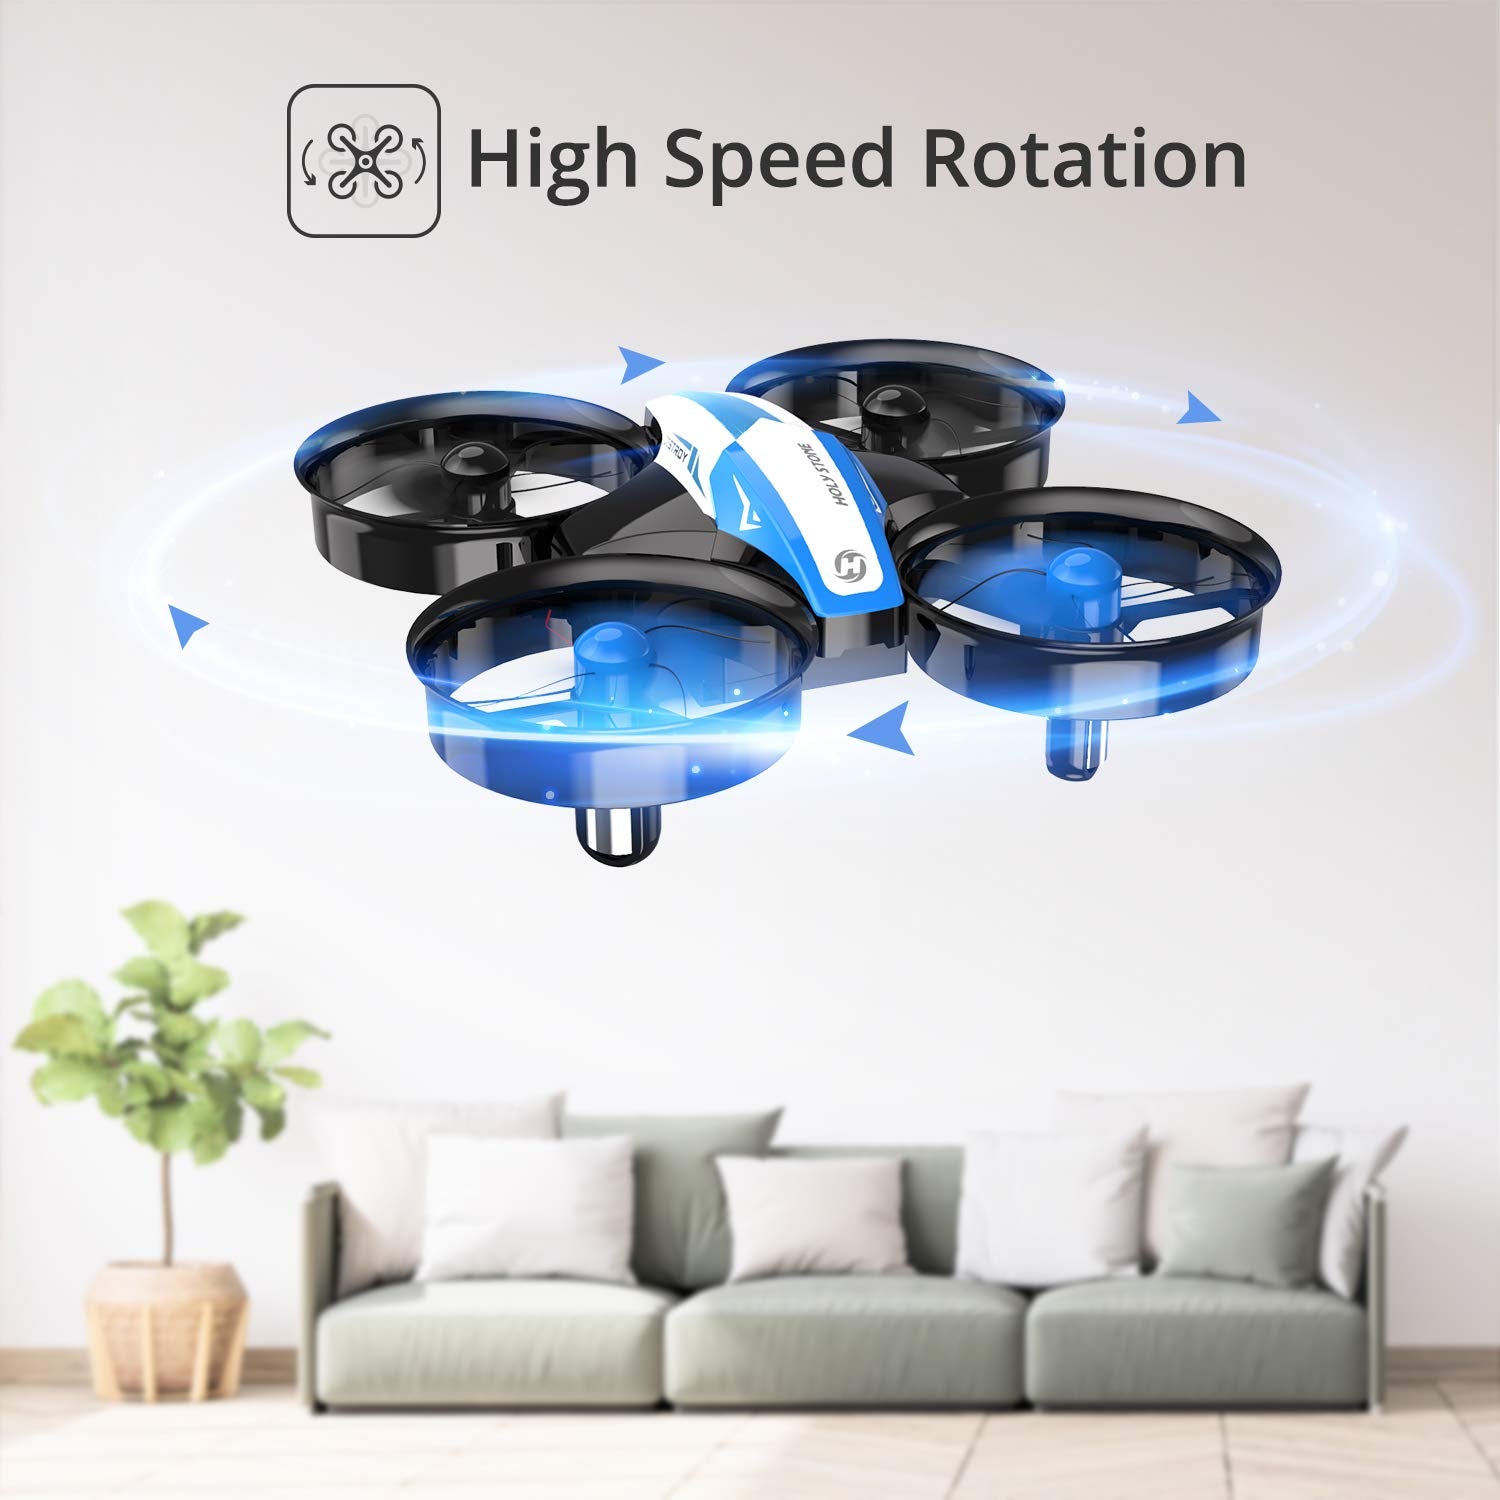 Holy Stone Mini Drone for Kids and Beginners RC Nano Quadcopter Indoor Small Helicopter Plane with Auto Hovering, 3D Flip, Headless Mode and 3 Batteries, Great Gift Toy for Boys and Girls, Blue